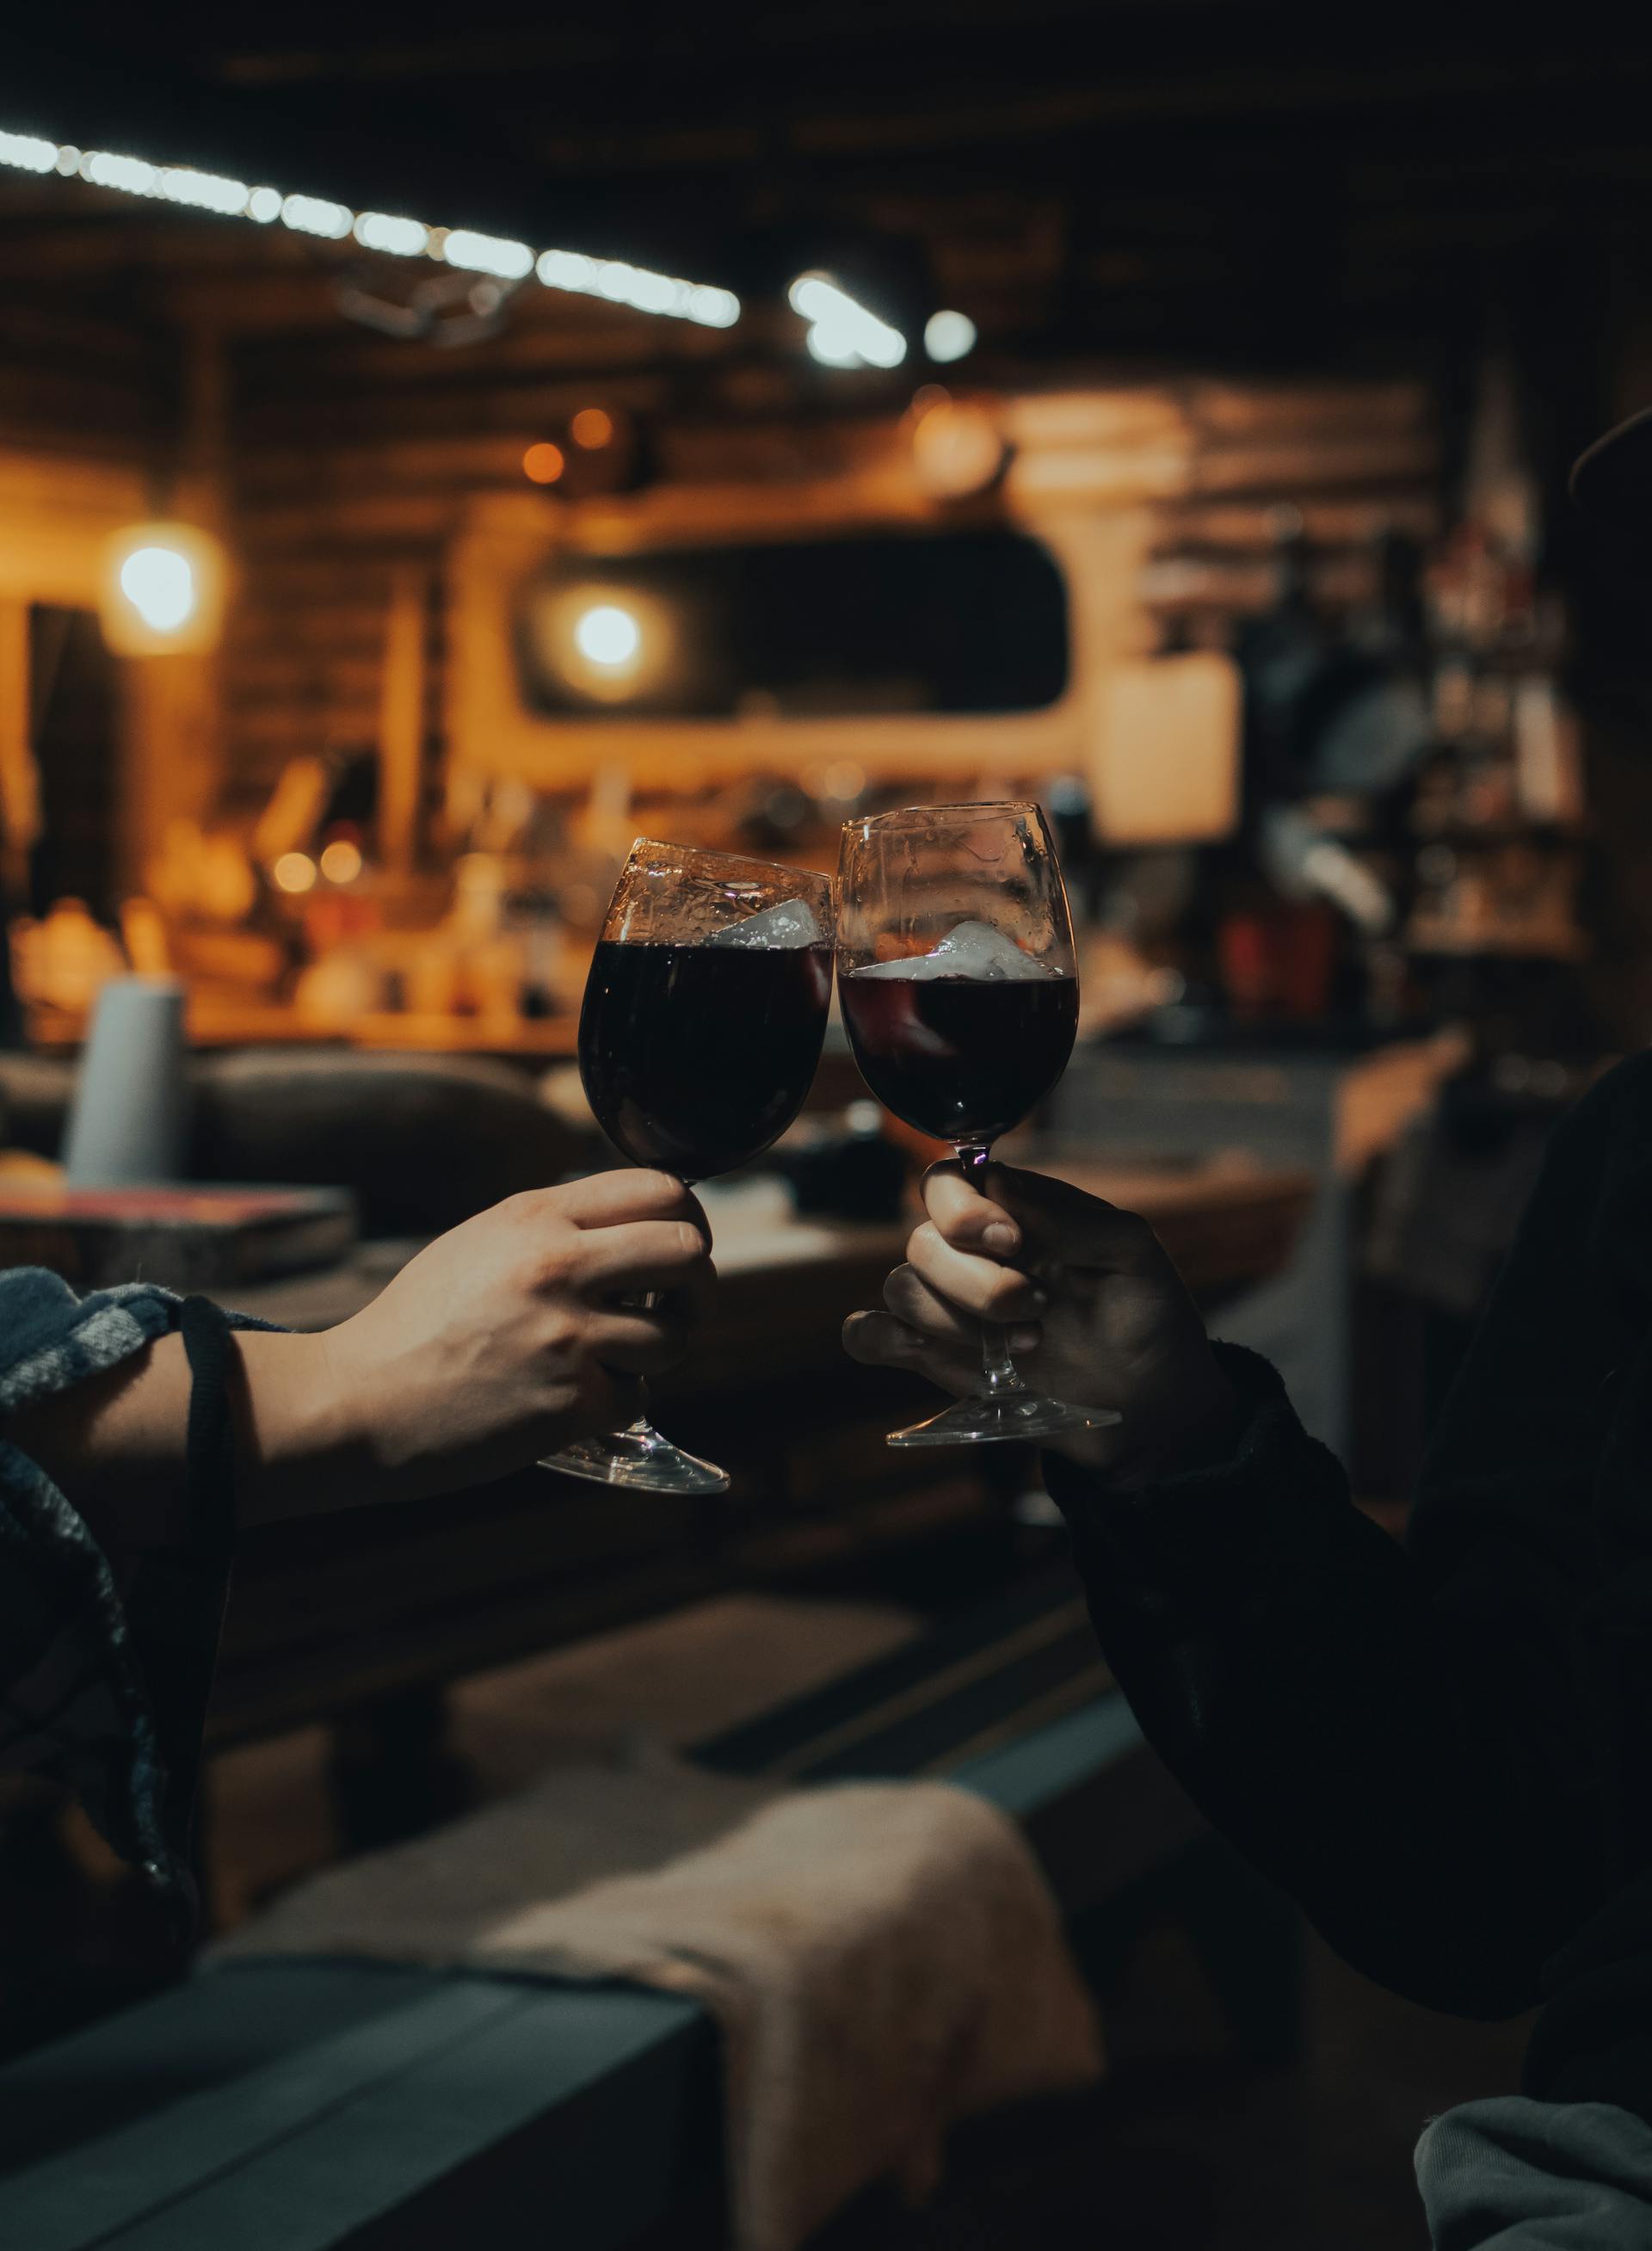 A couple toasting | Source: Pexels